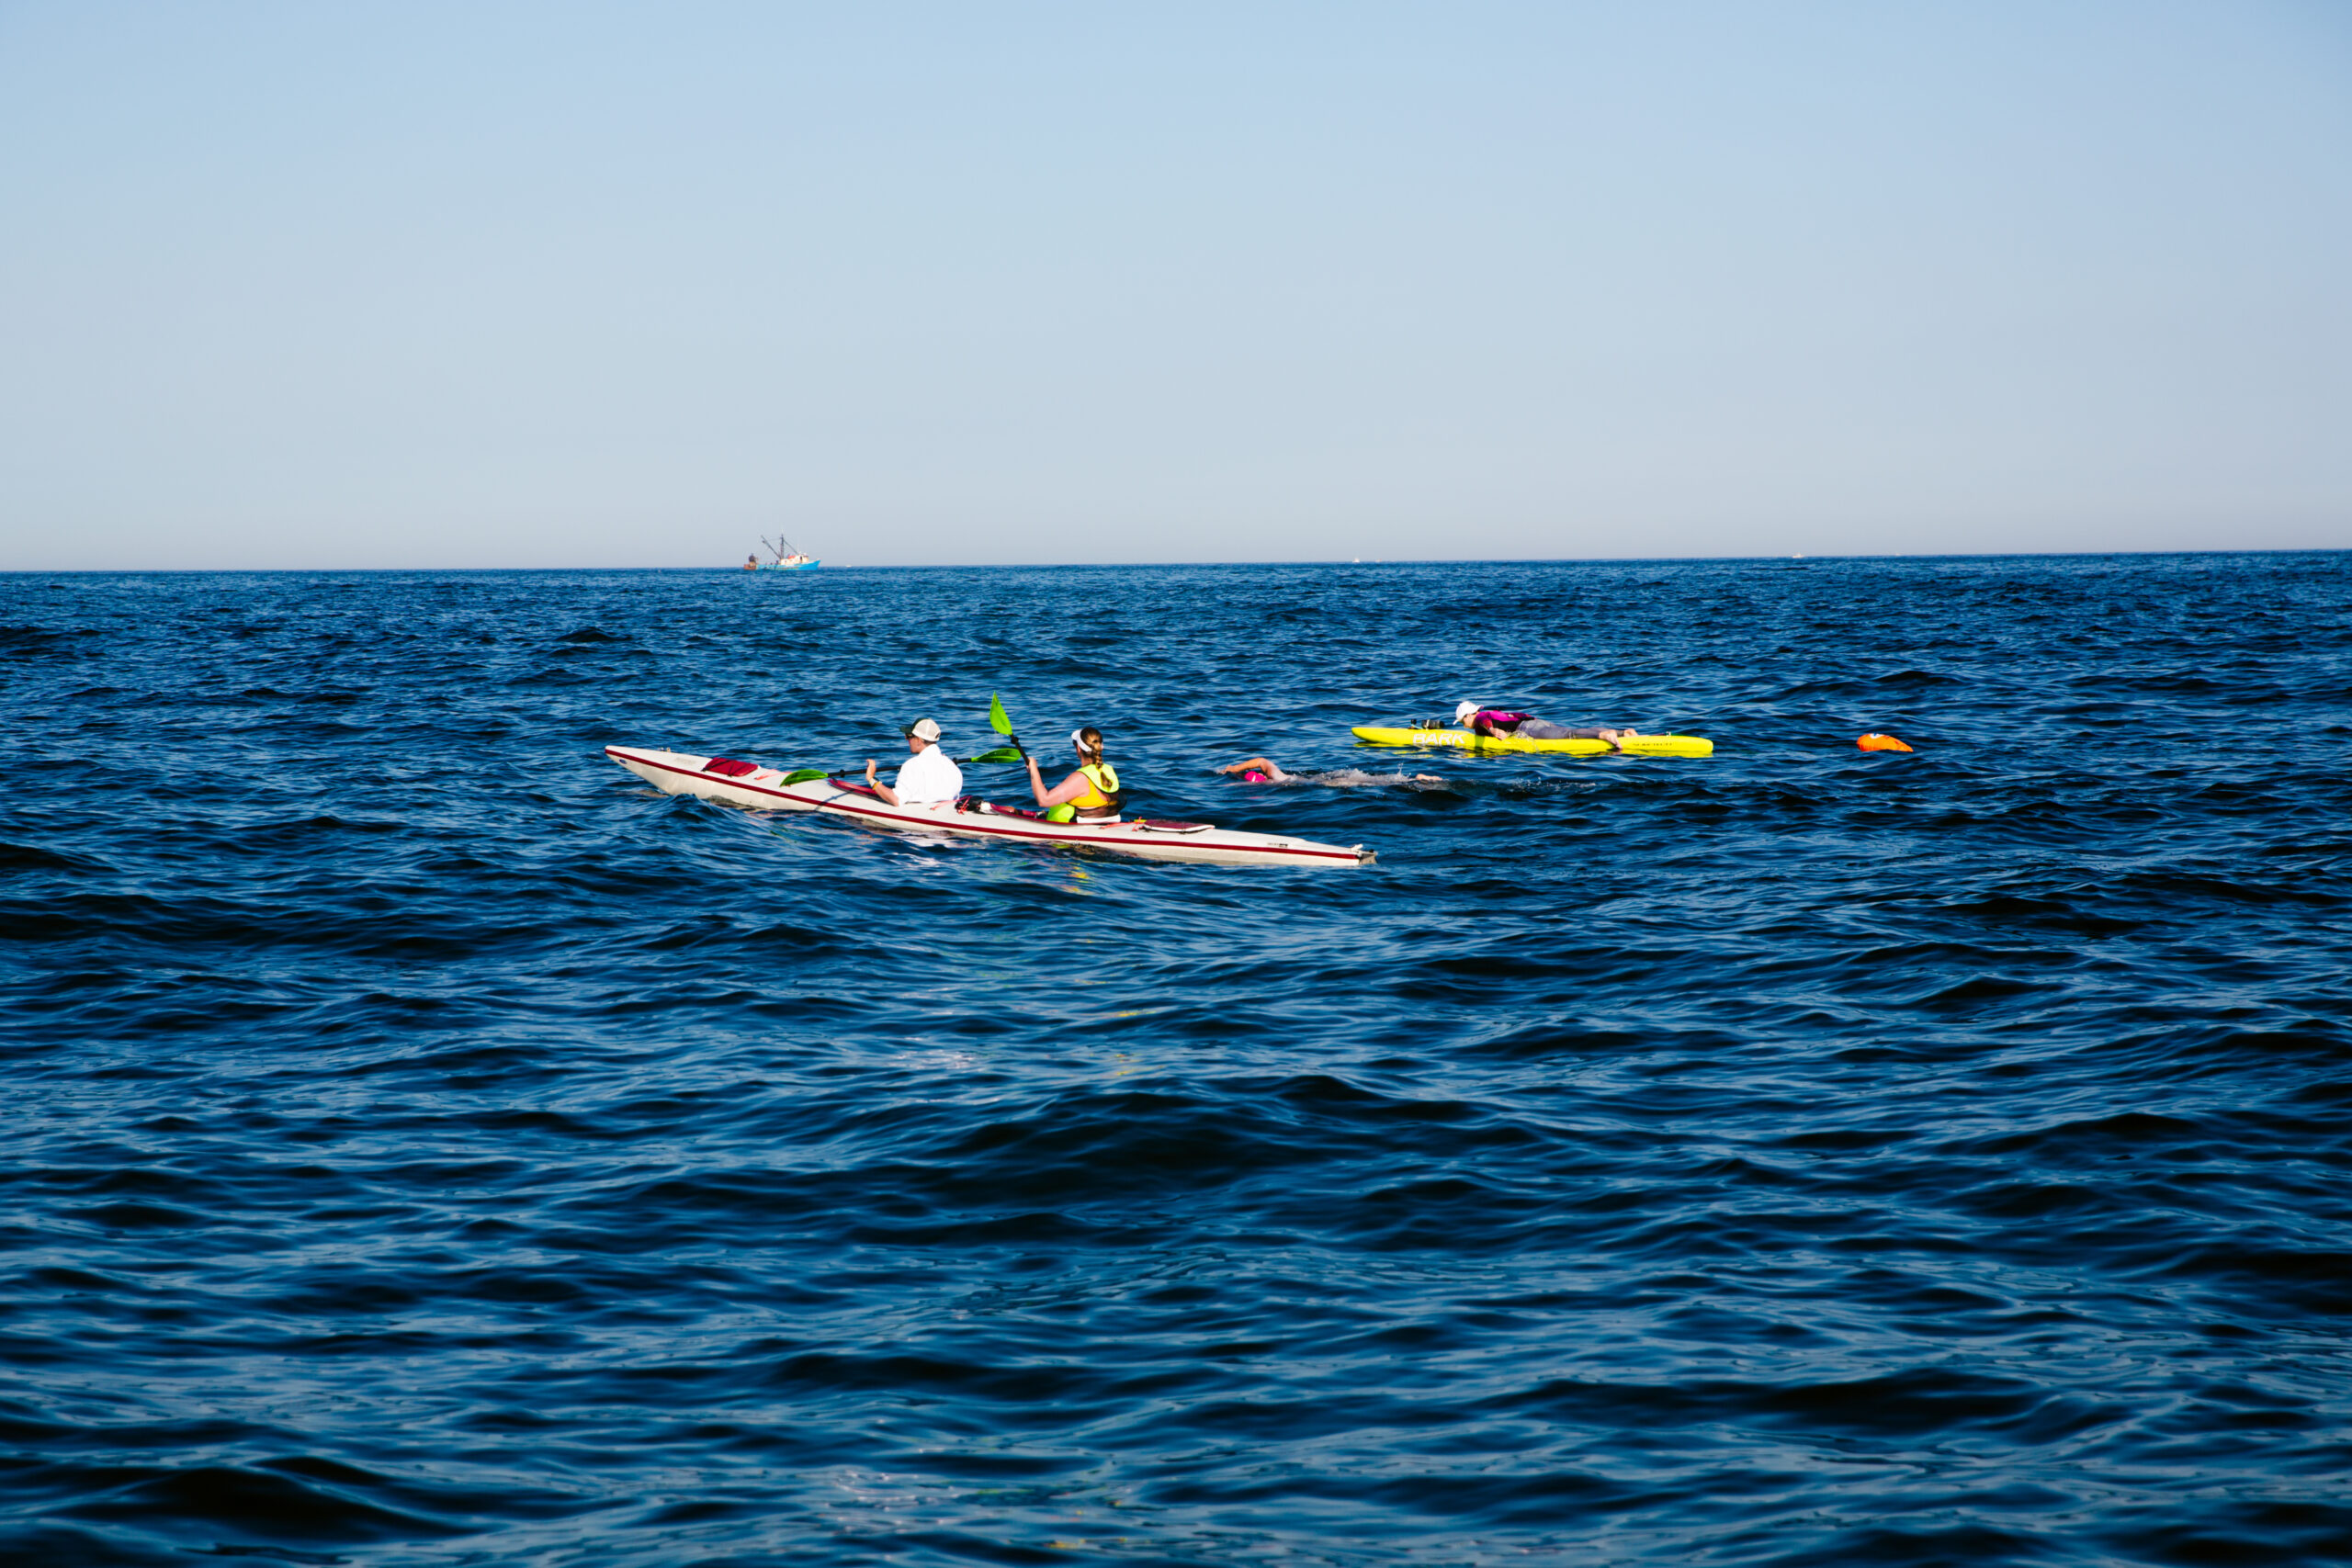 Lori King, 47, swam from Block Island to Montauk on August 3, flanked by a team of supporters on two boats, a kayak and paddle board. DREW MALONEY PHOTOS